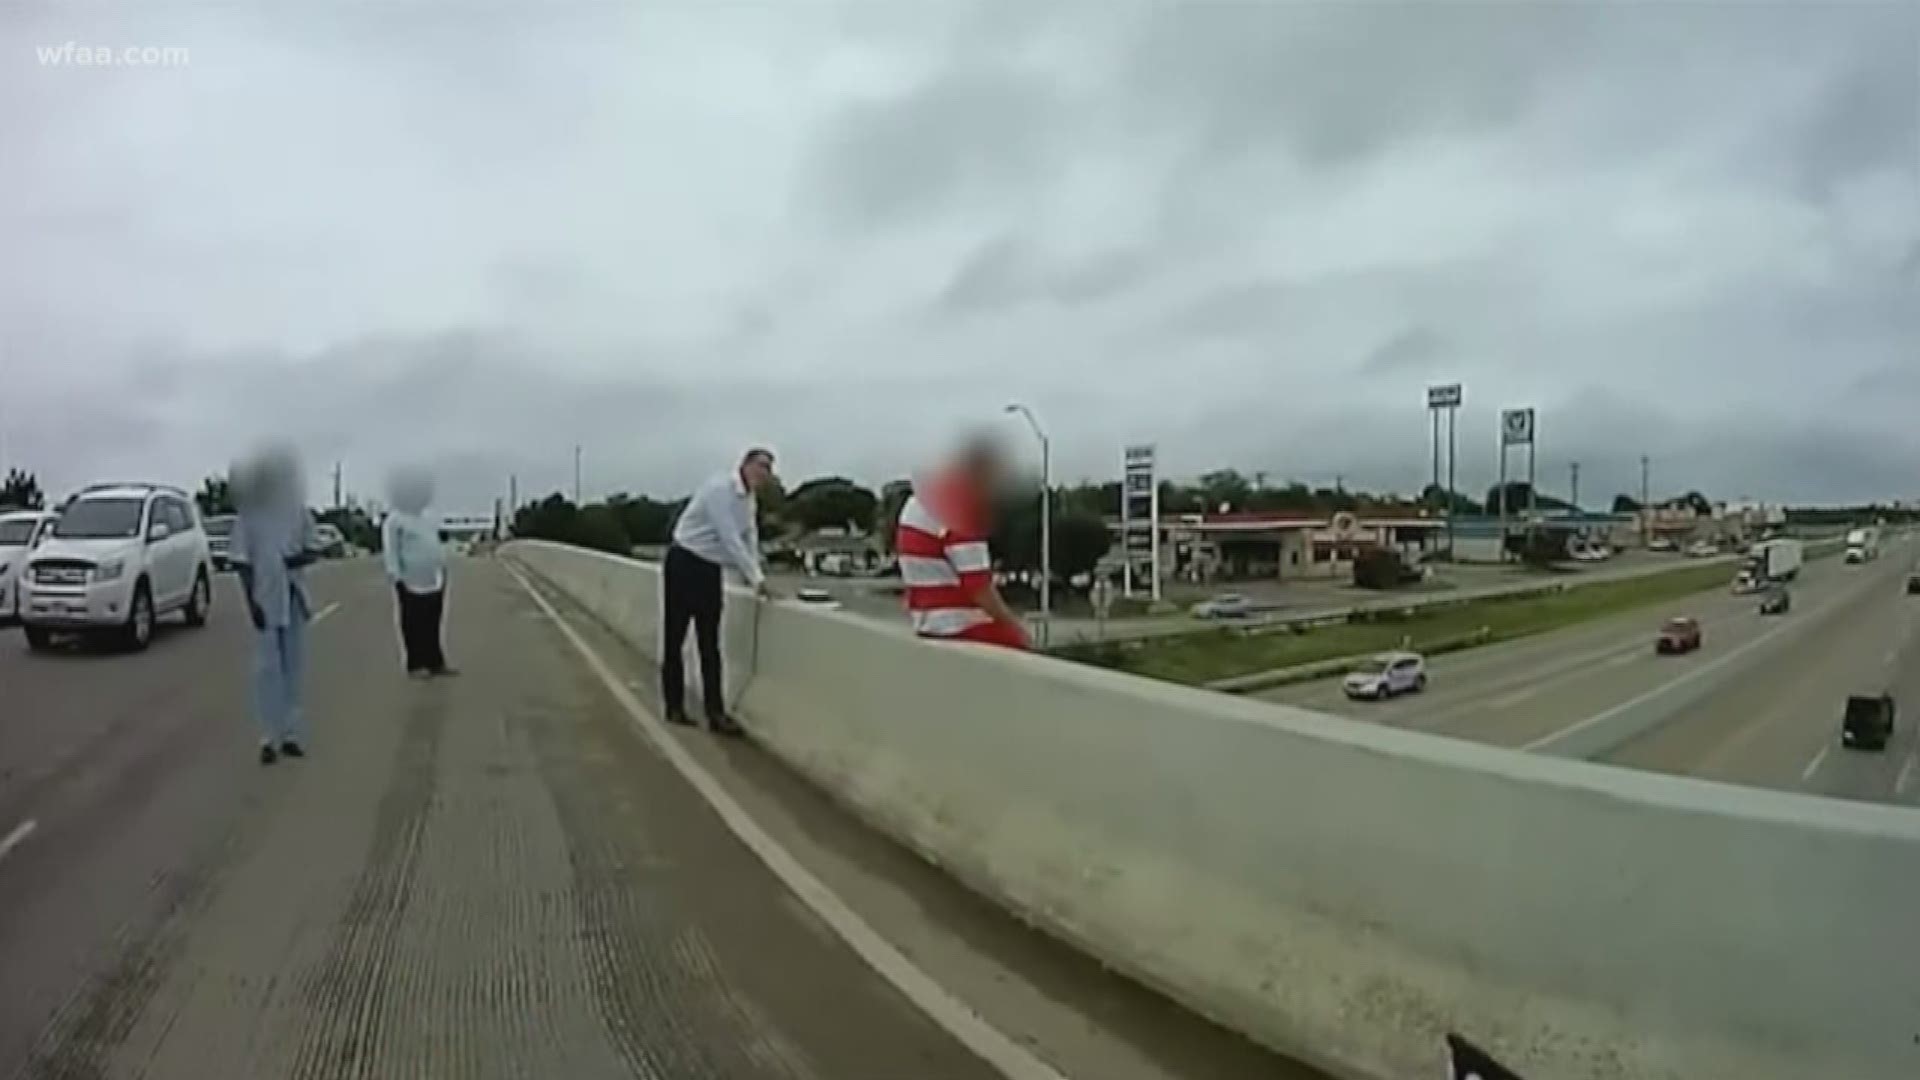 Officer pulls man from edge of overpass